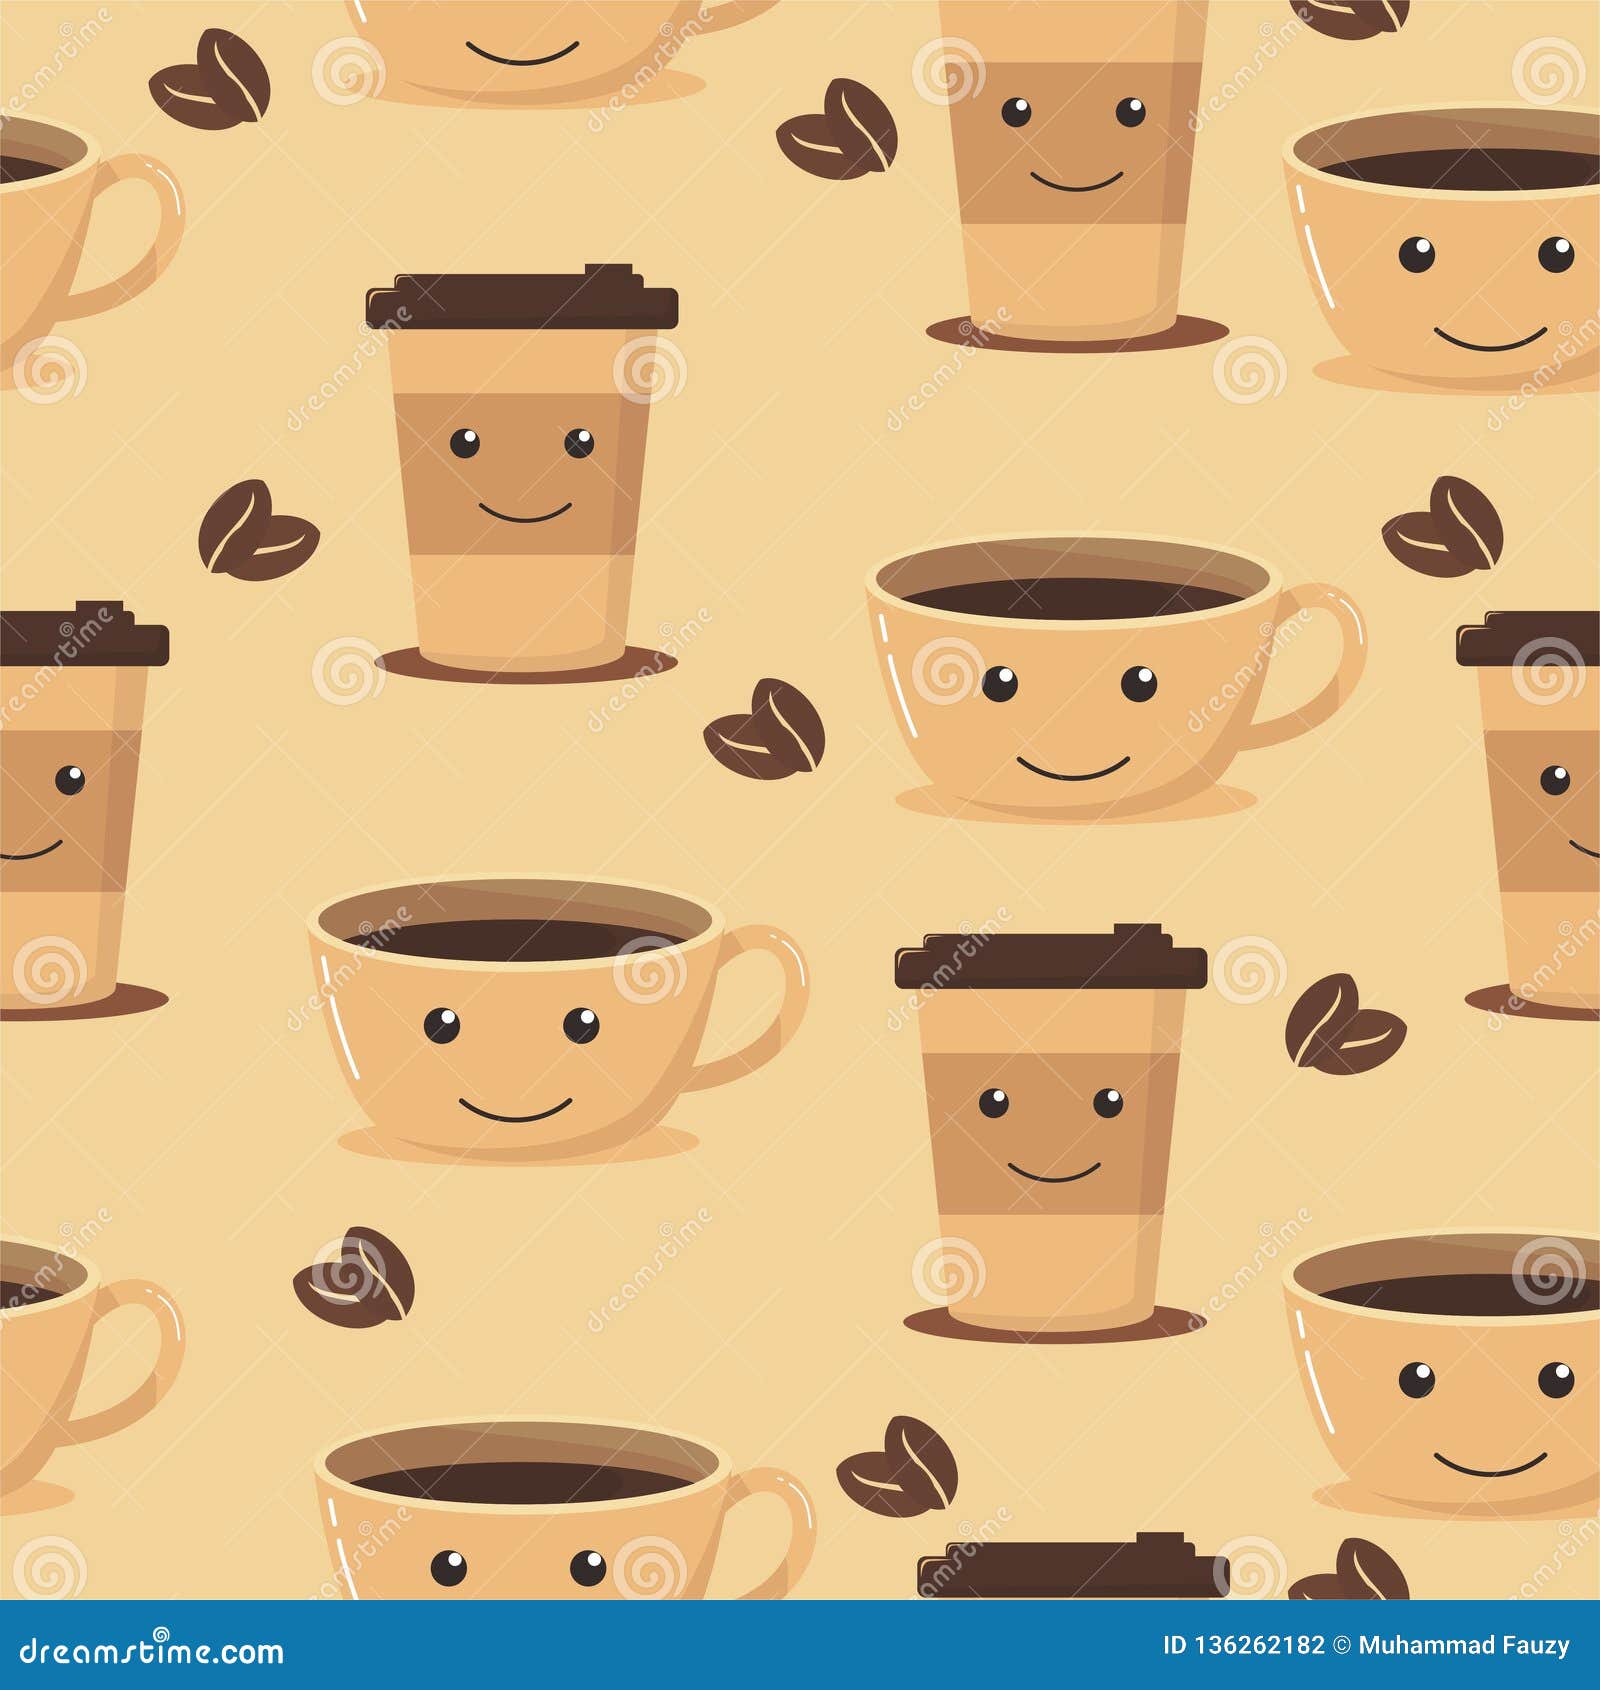 42822 Cute Coffee Pattern Images Stock Photos  Vectors  Shutterstock